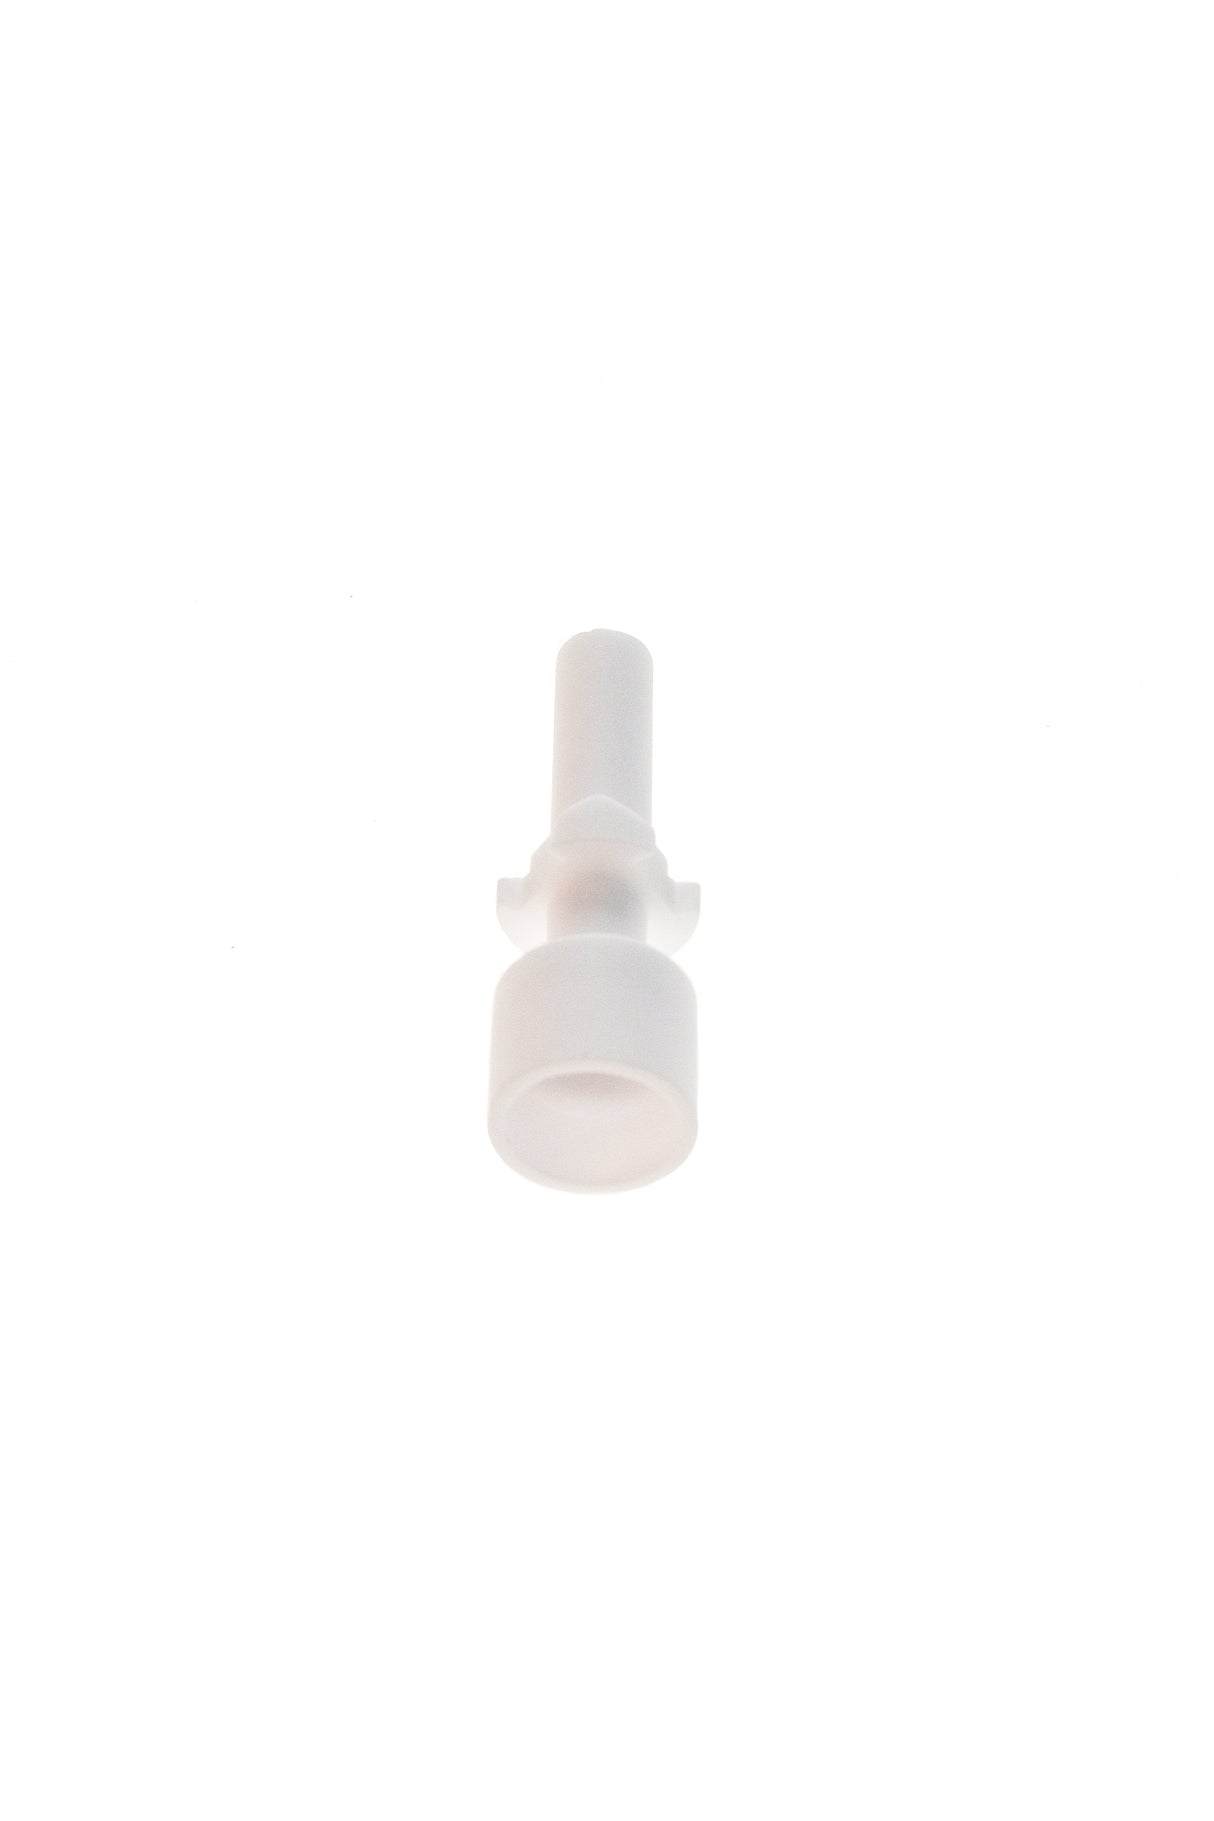 TAG Ceramic Nail for Dab Rigs, requires dome, front view on white background